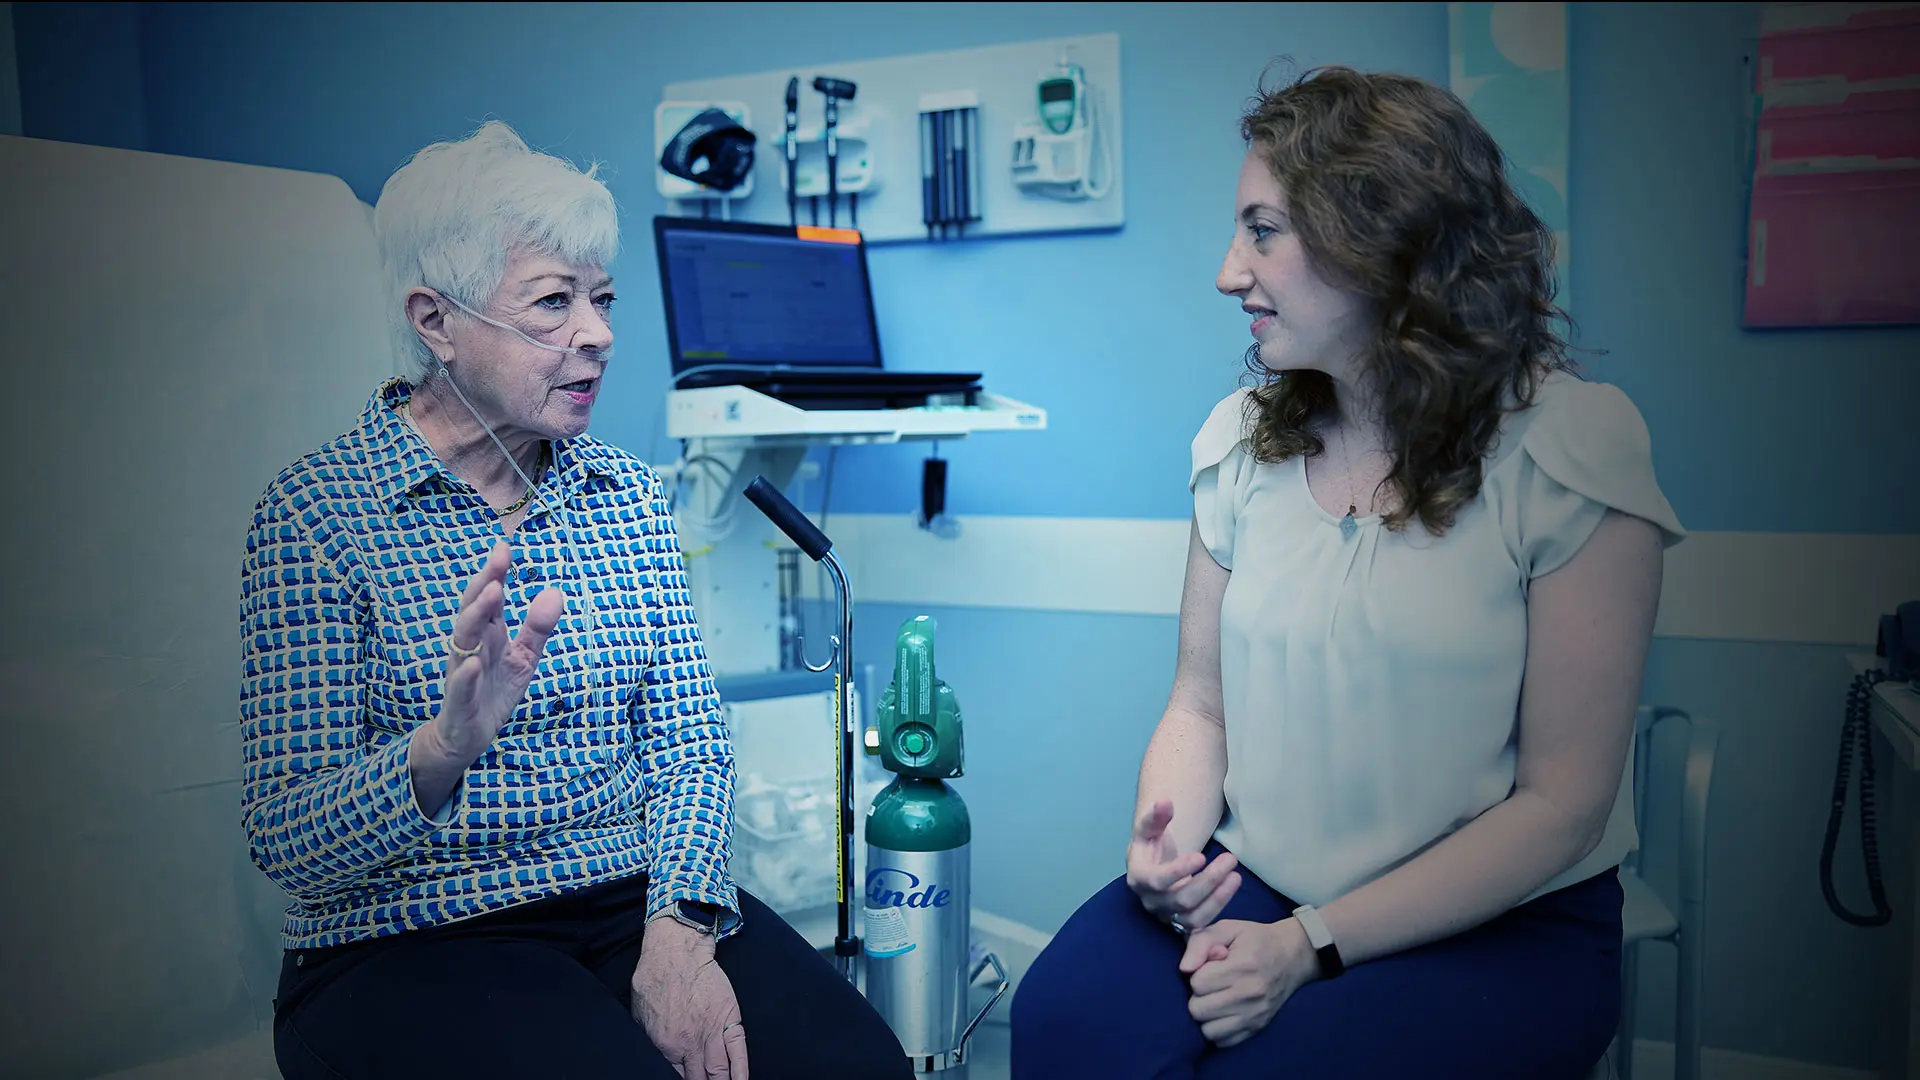 Support Services at Mount Sinai Make a Difference for Patients With Lung Disease